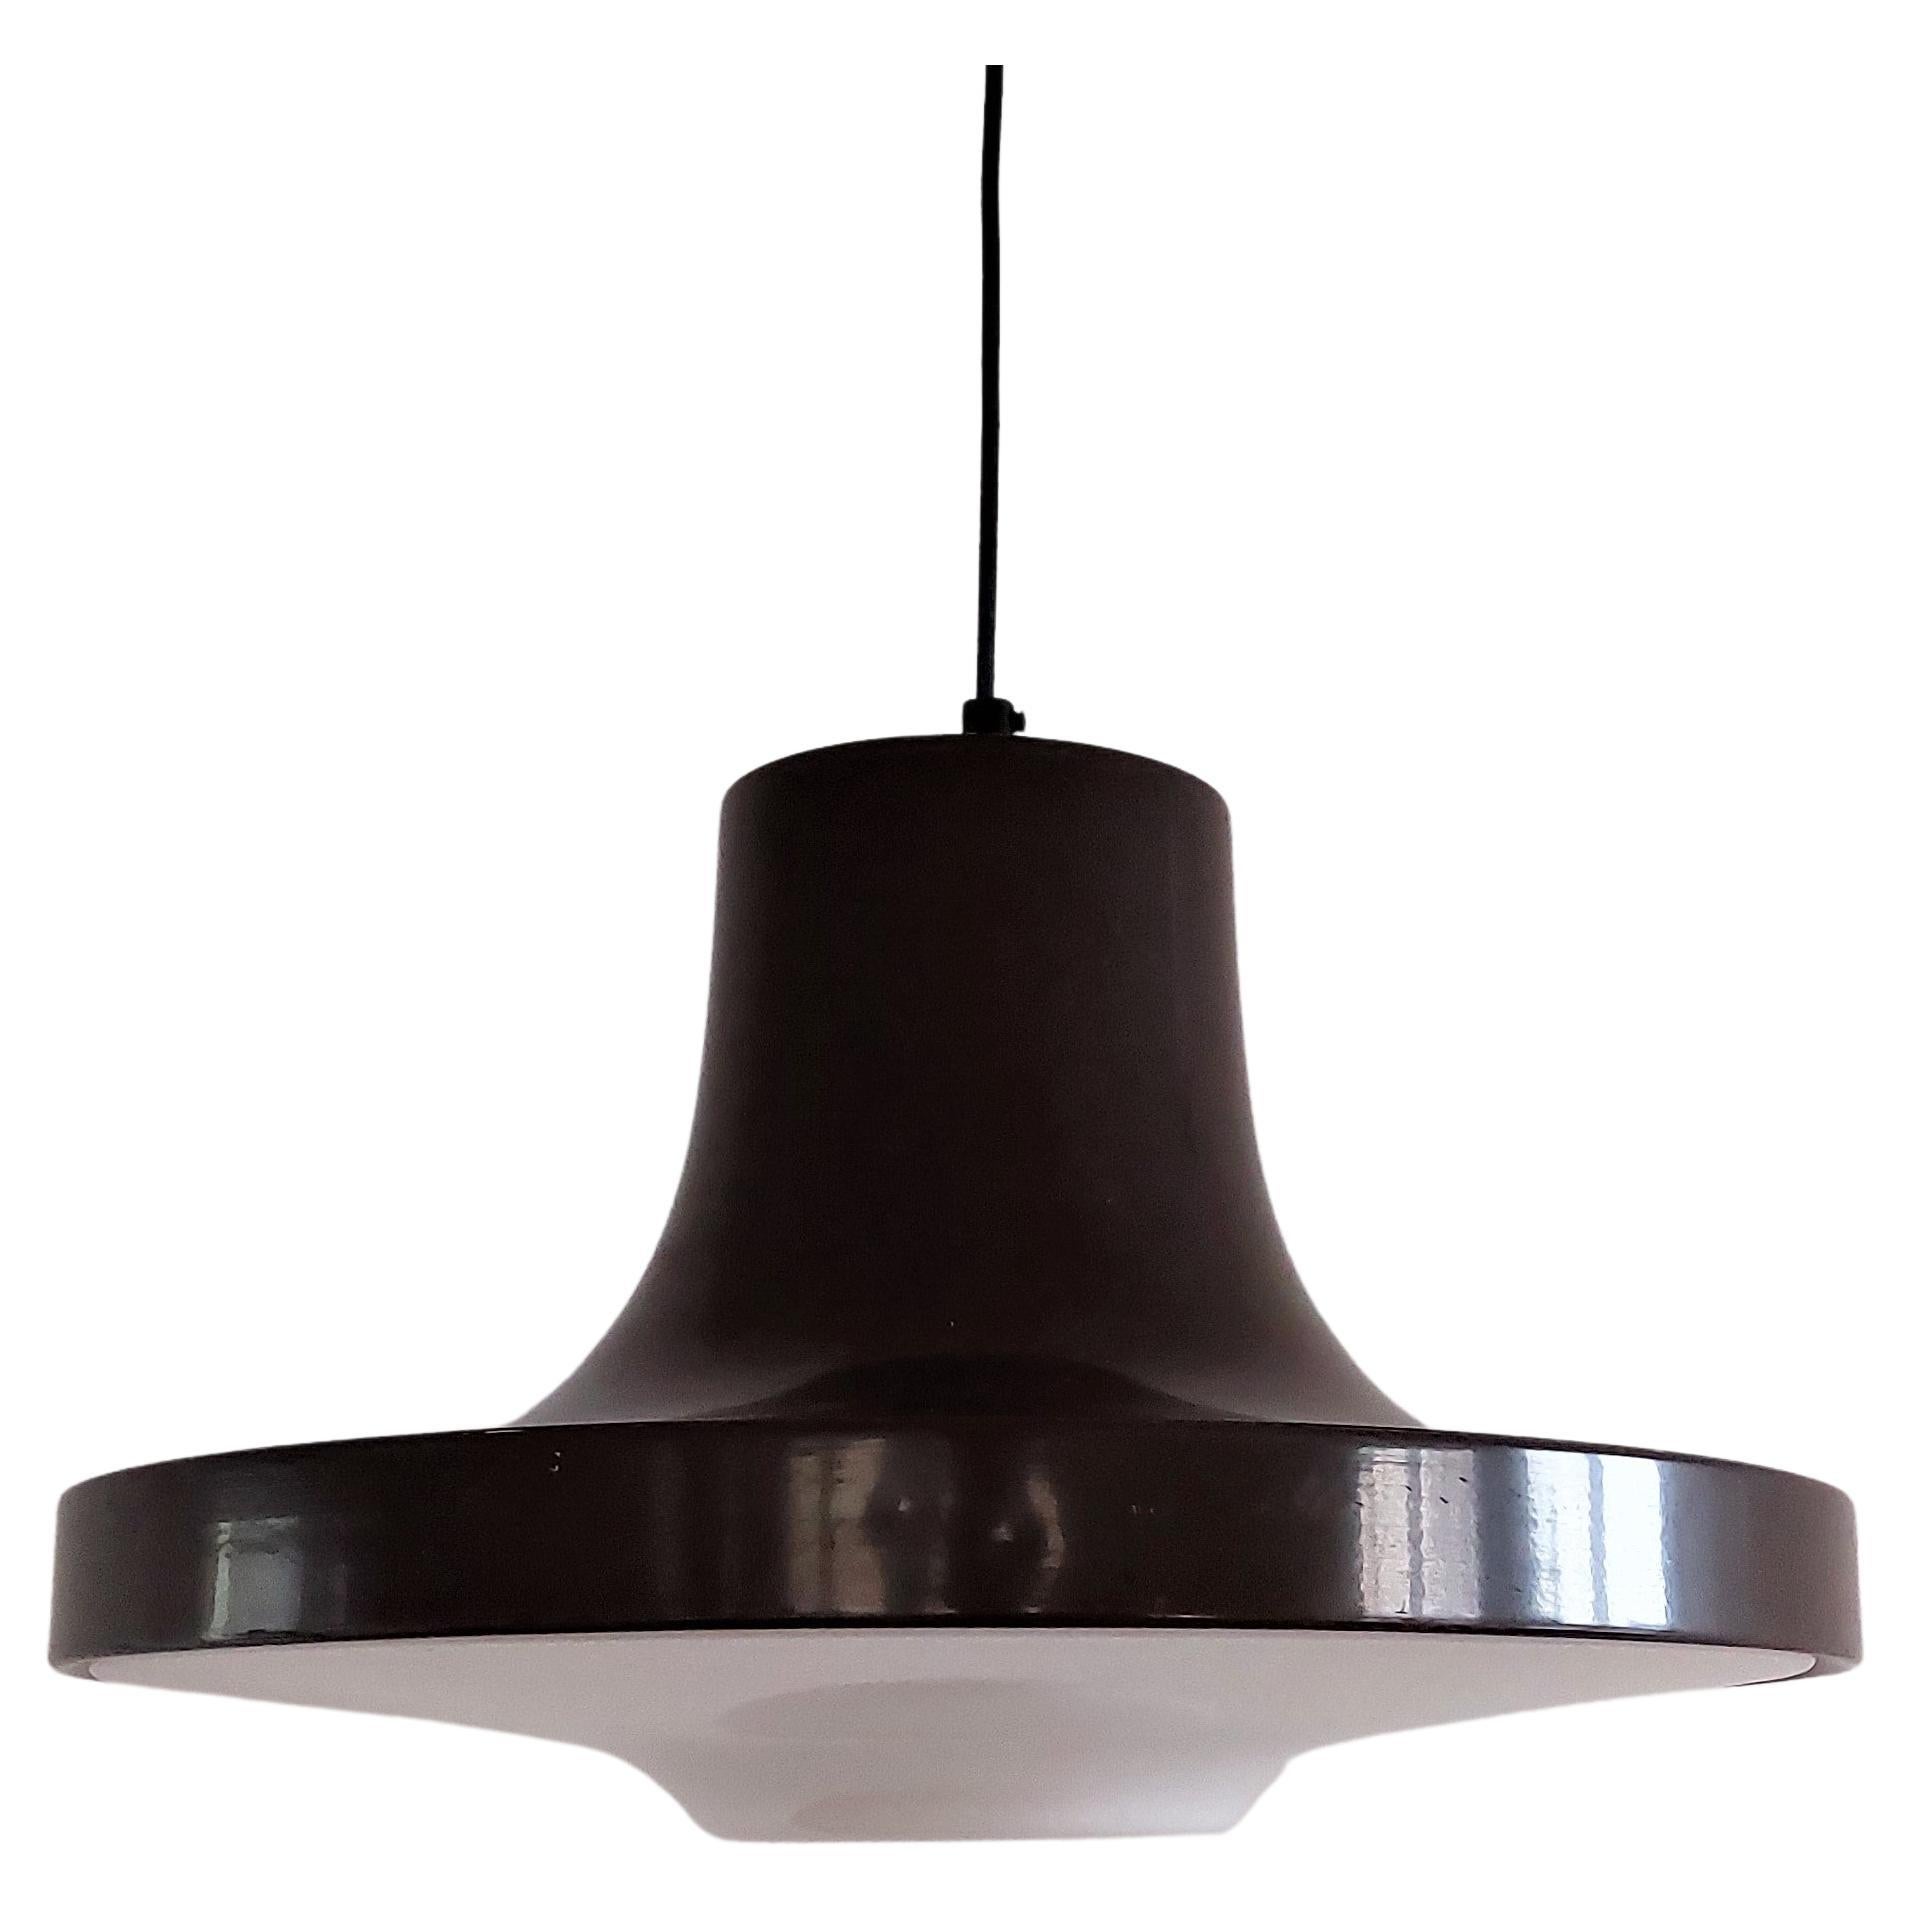 Brown Metal Pendant Lamp with Perspex Diffuser for Ab Fagerhult, Sweden For Sale